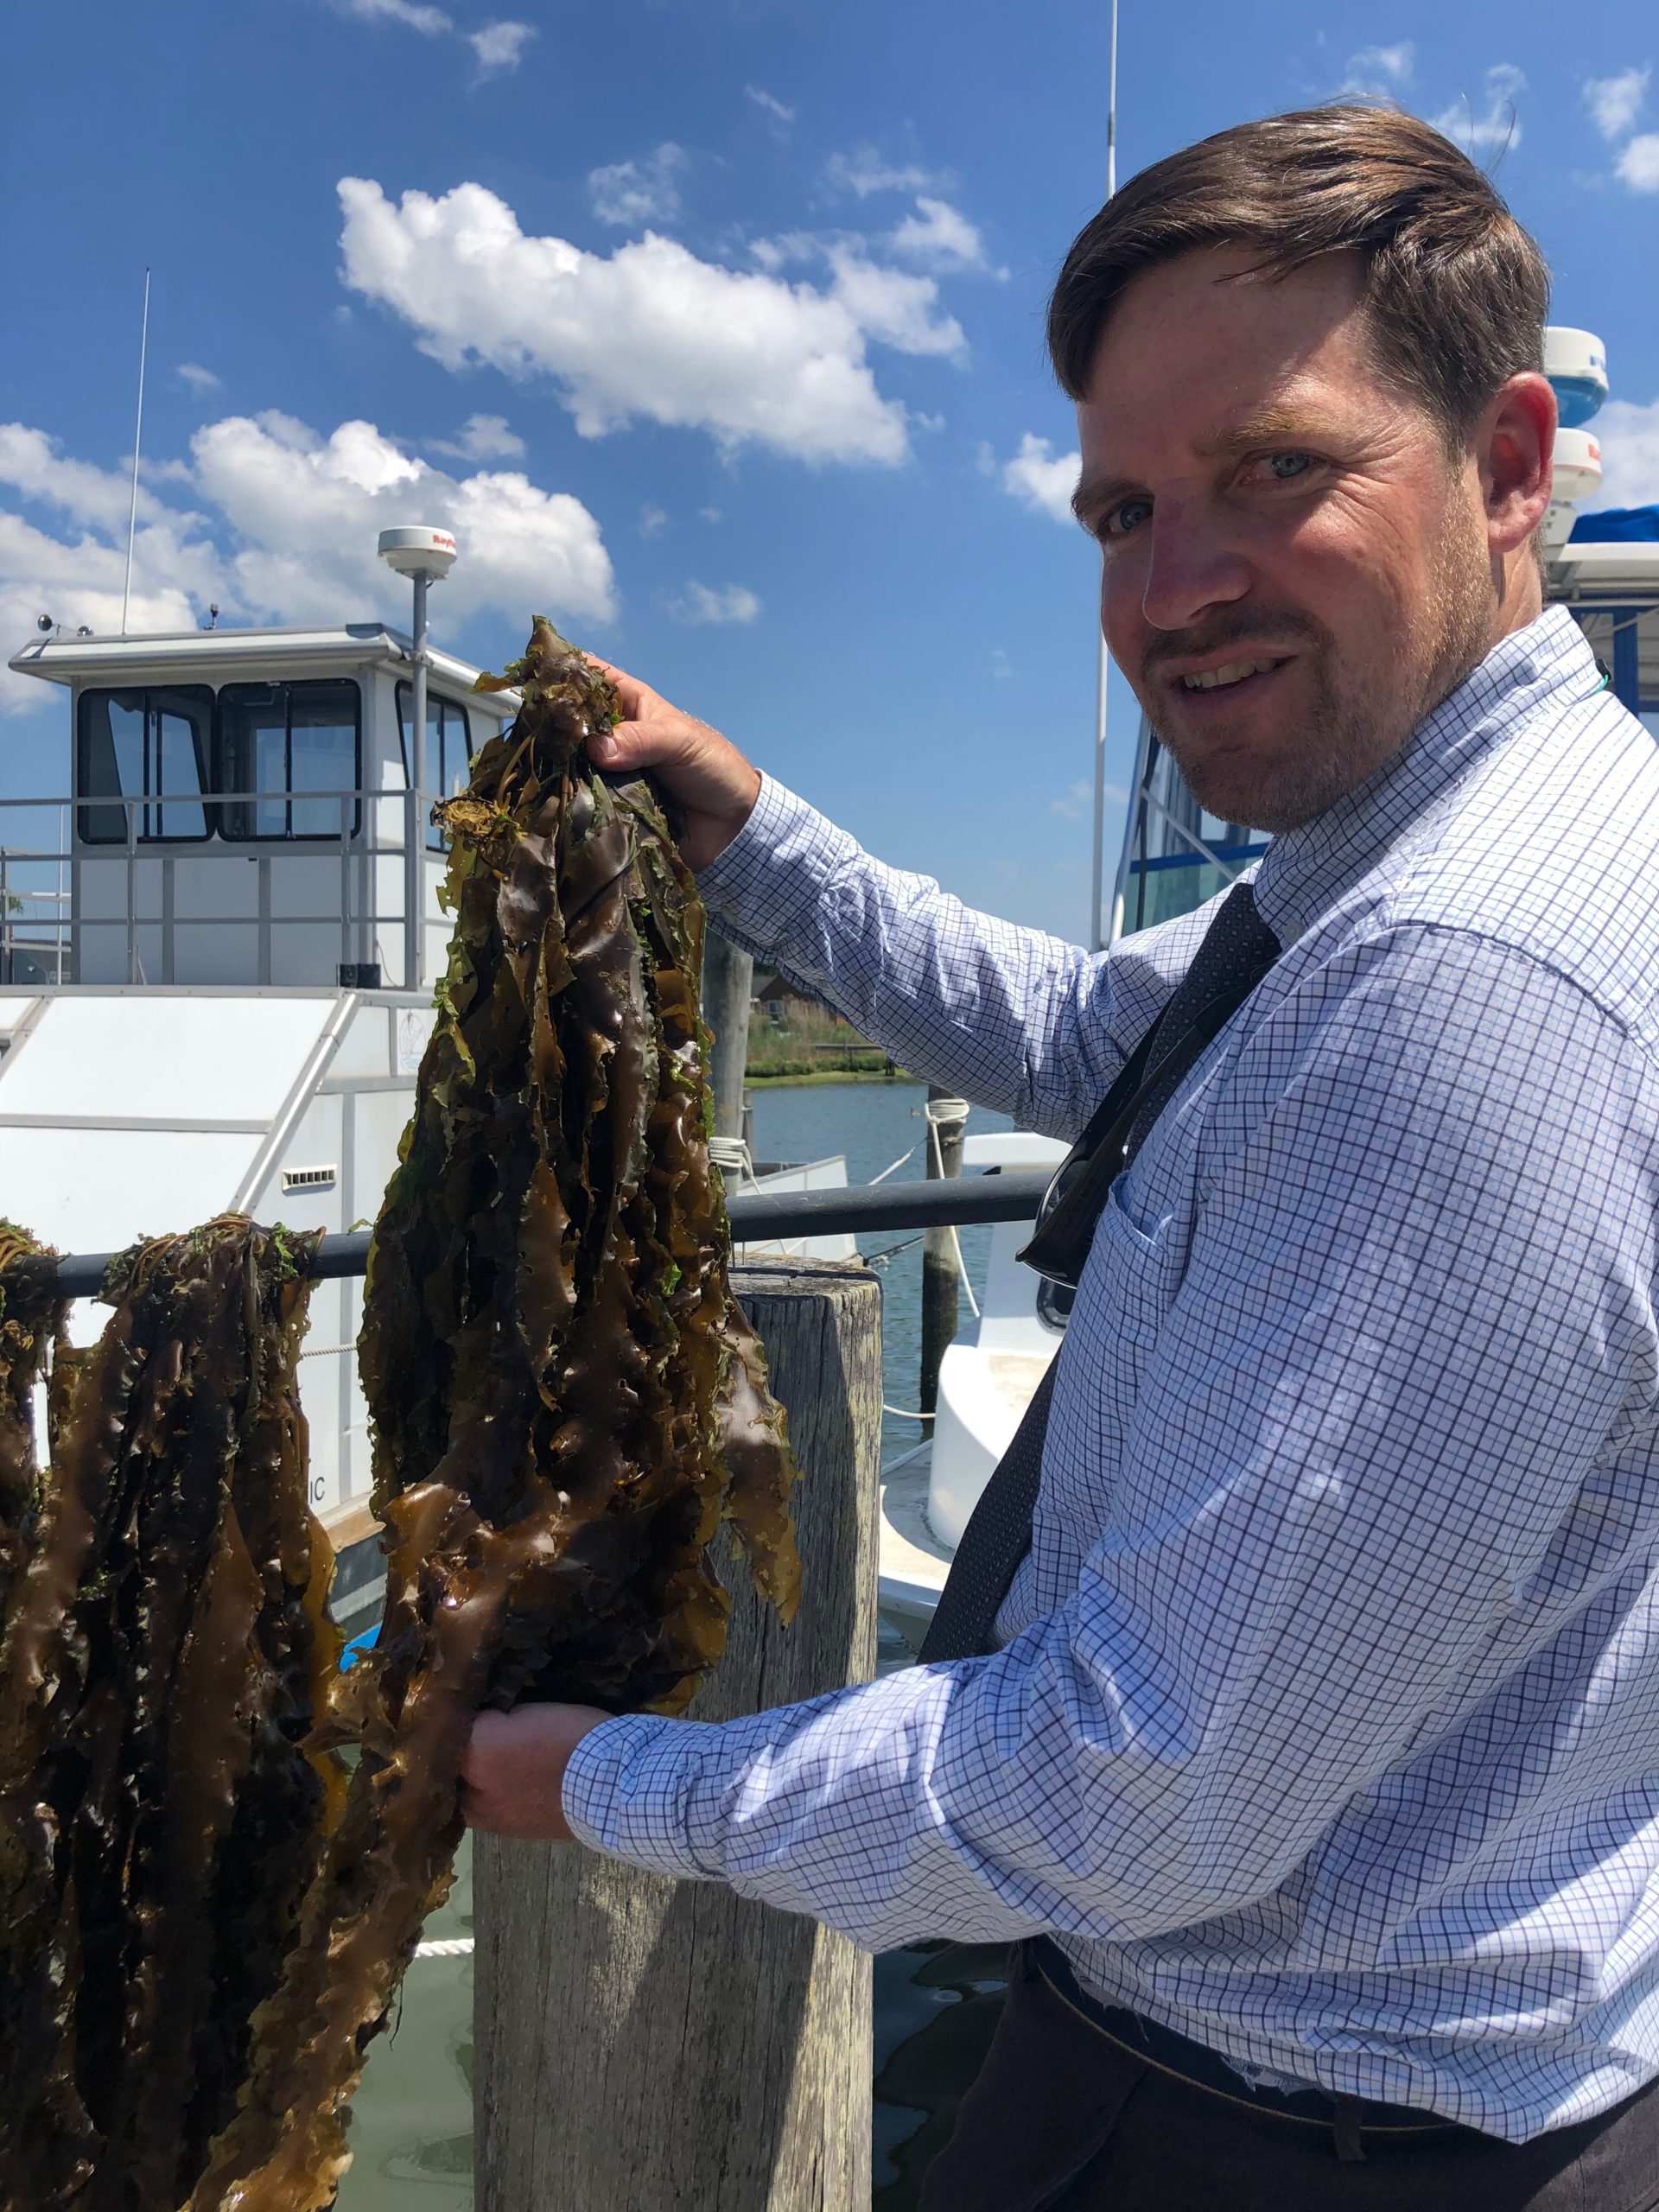 Peconic Baykeeper Peter Topping with kelp harvested from local bays.